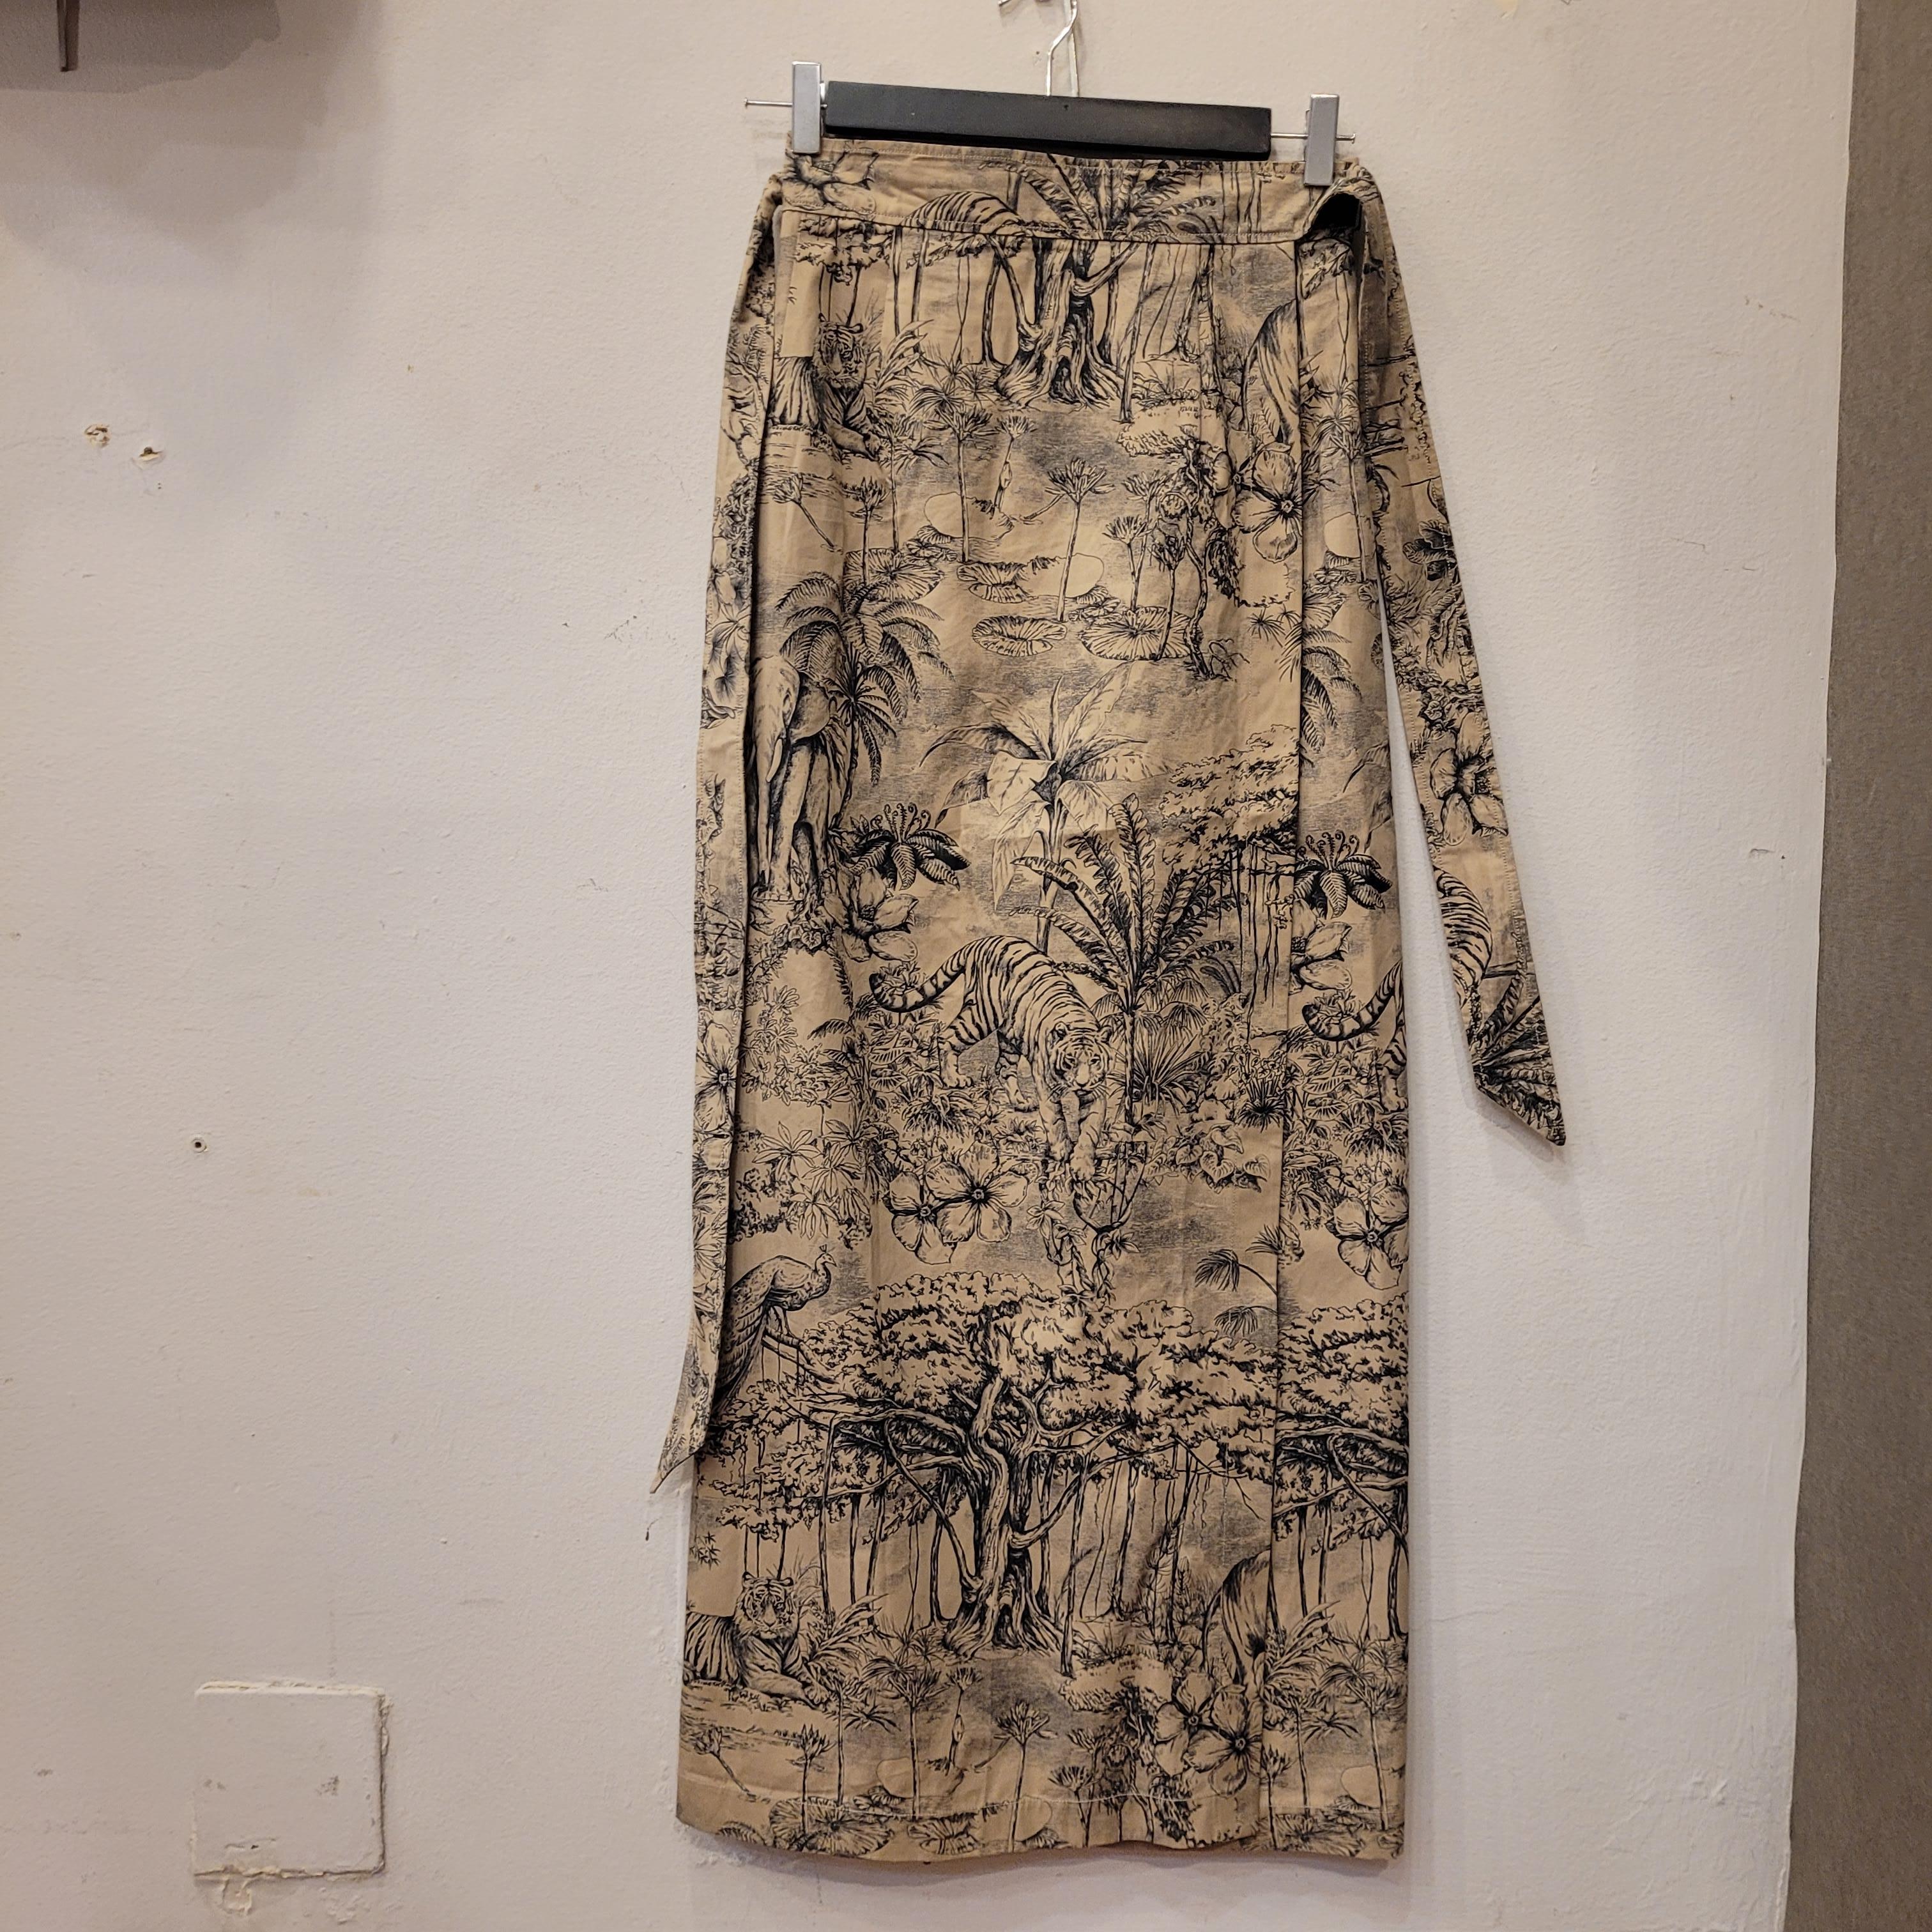 Beautiful long skirt from the Christian Dior 2023 Indiana collection, with a portfolio  or wrap design and decorated with the Indian garden motif in vivid shades of black, beige and gray, gorgeous animals like tiger or elephant walking in the